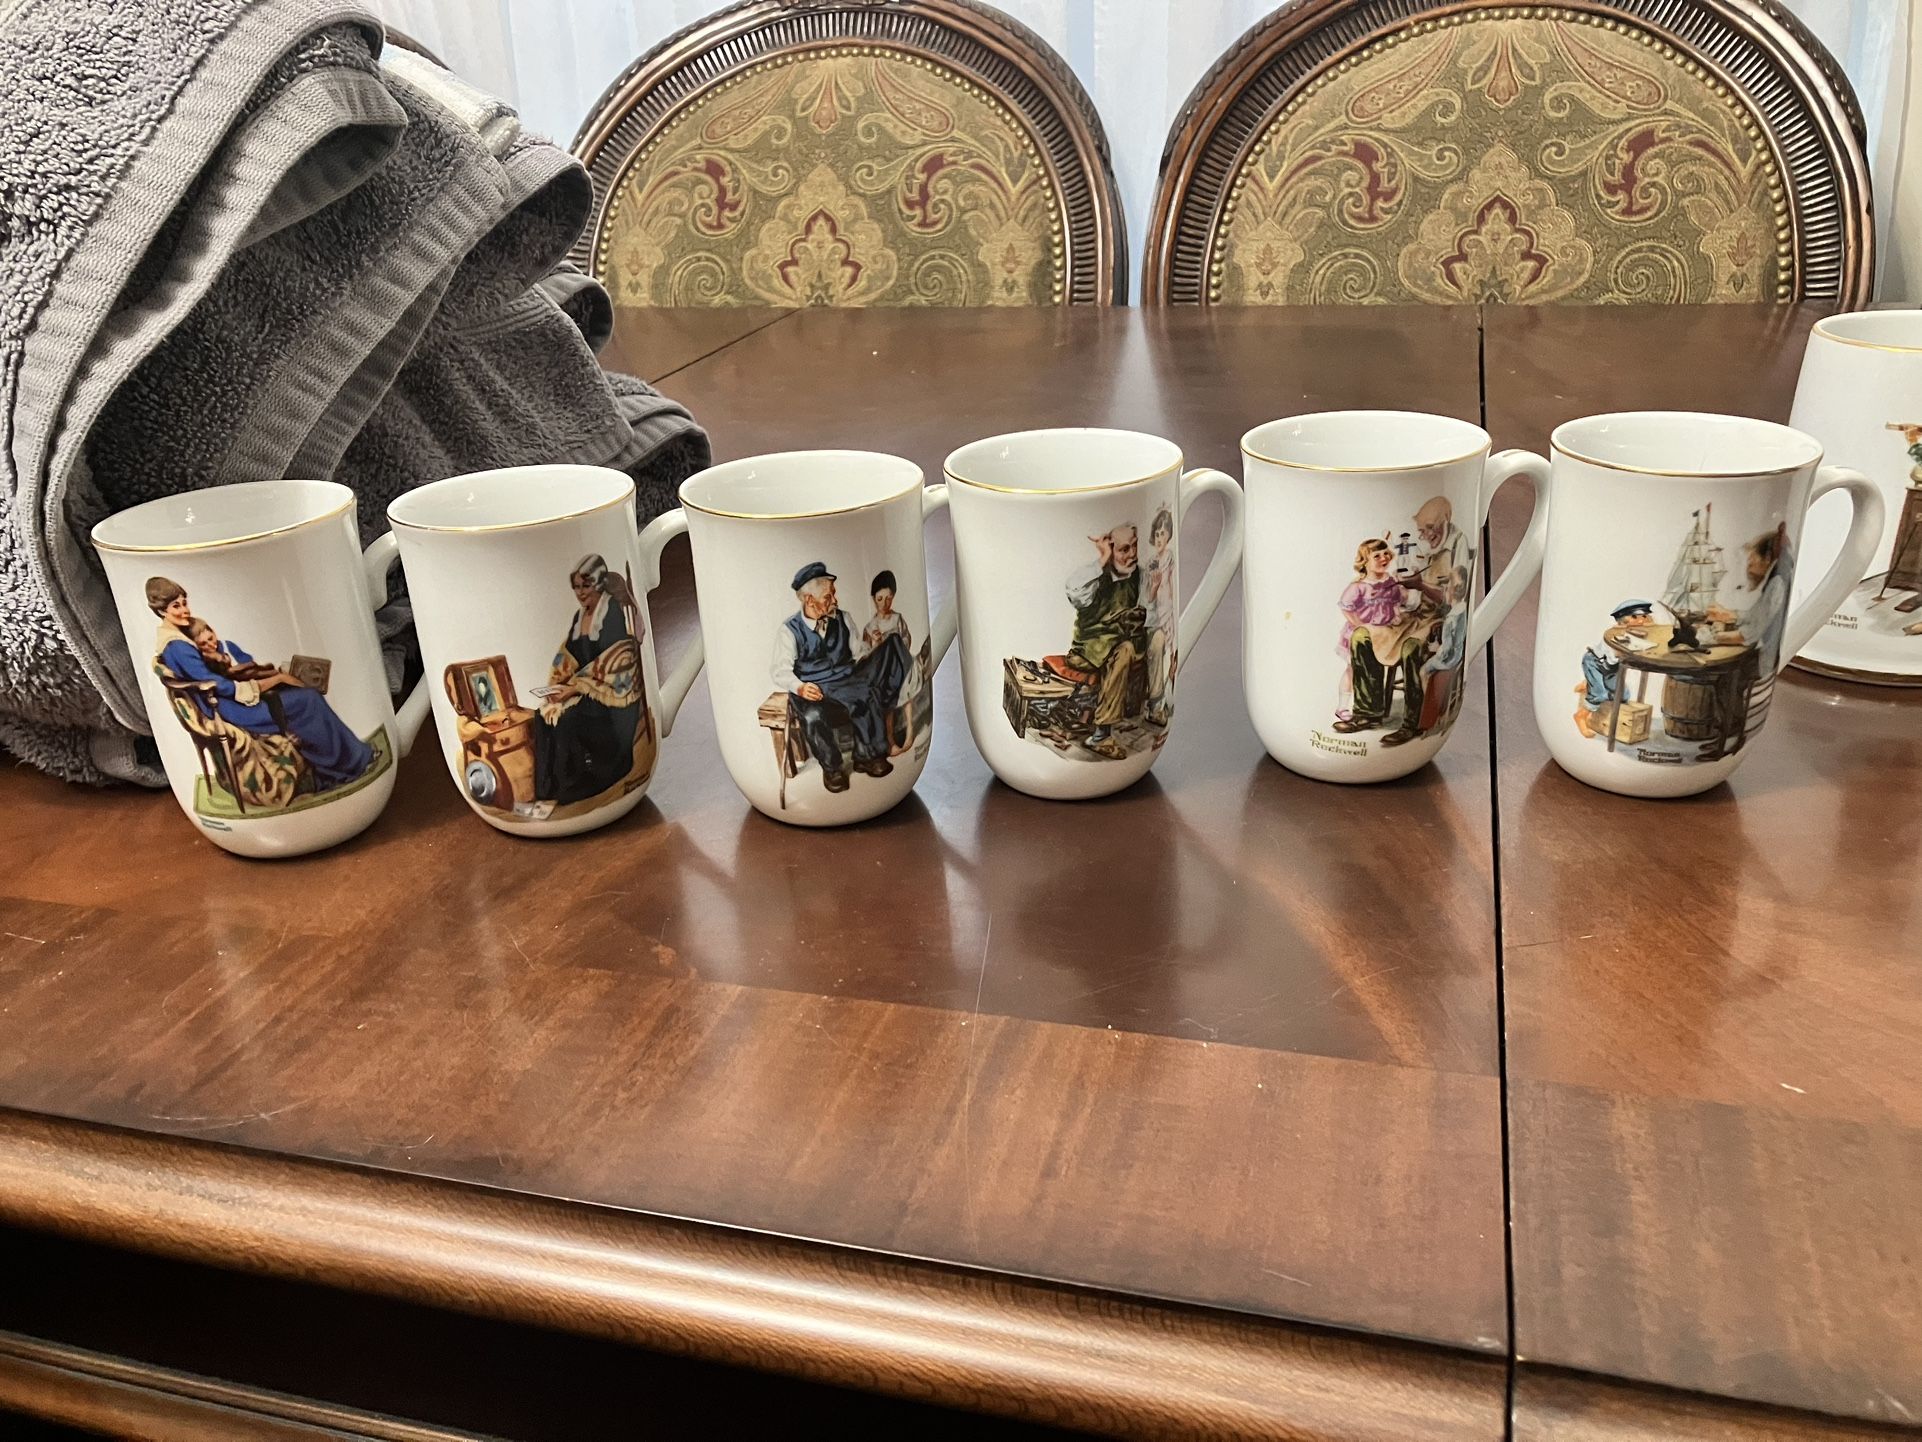 6 Norman Rockwell Mugs And 3 Steins